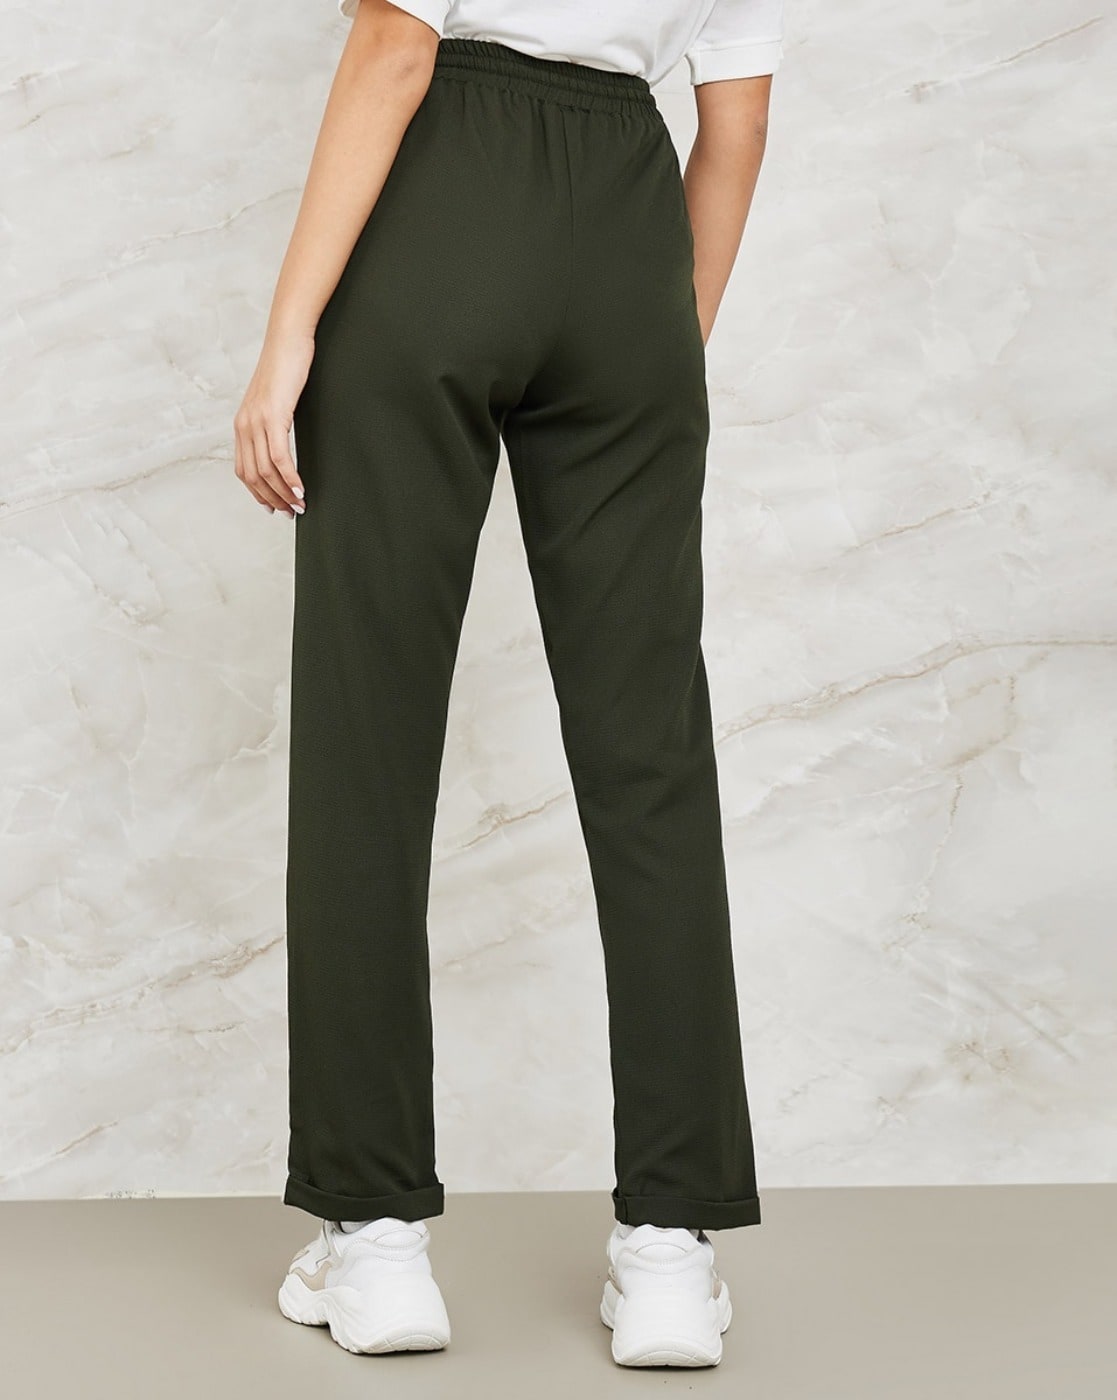 Women Tapered Fit Pants with Elasticated Drawstring Waist